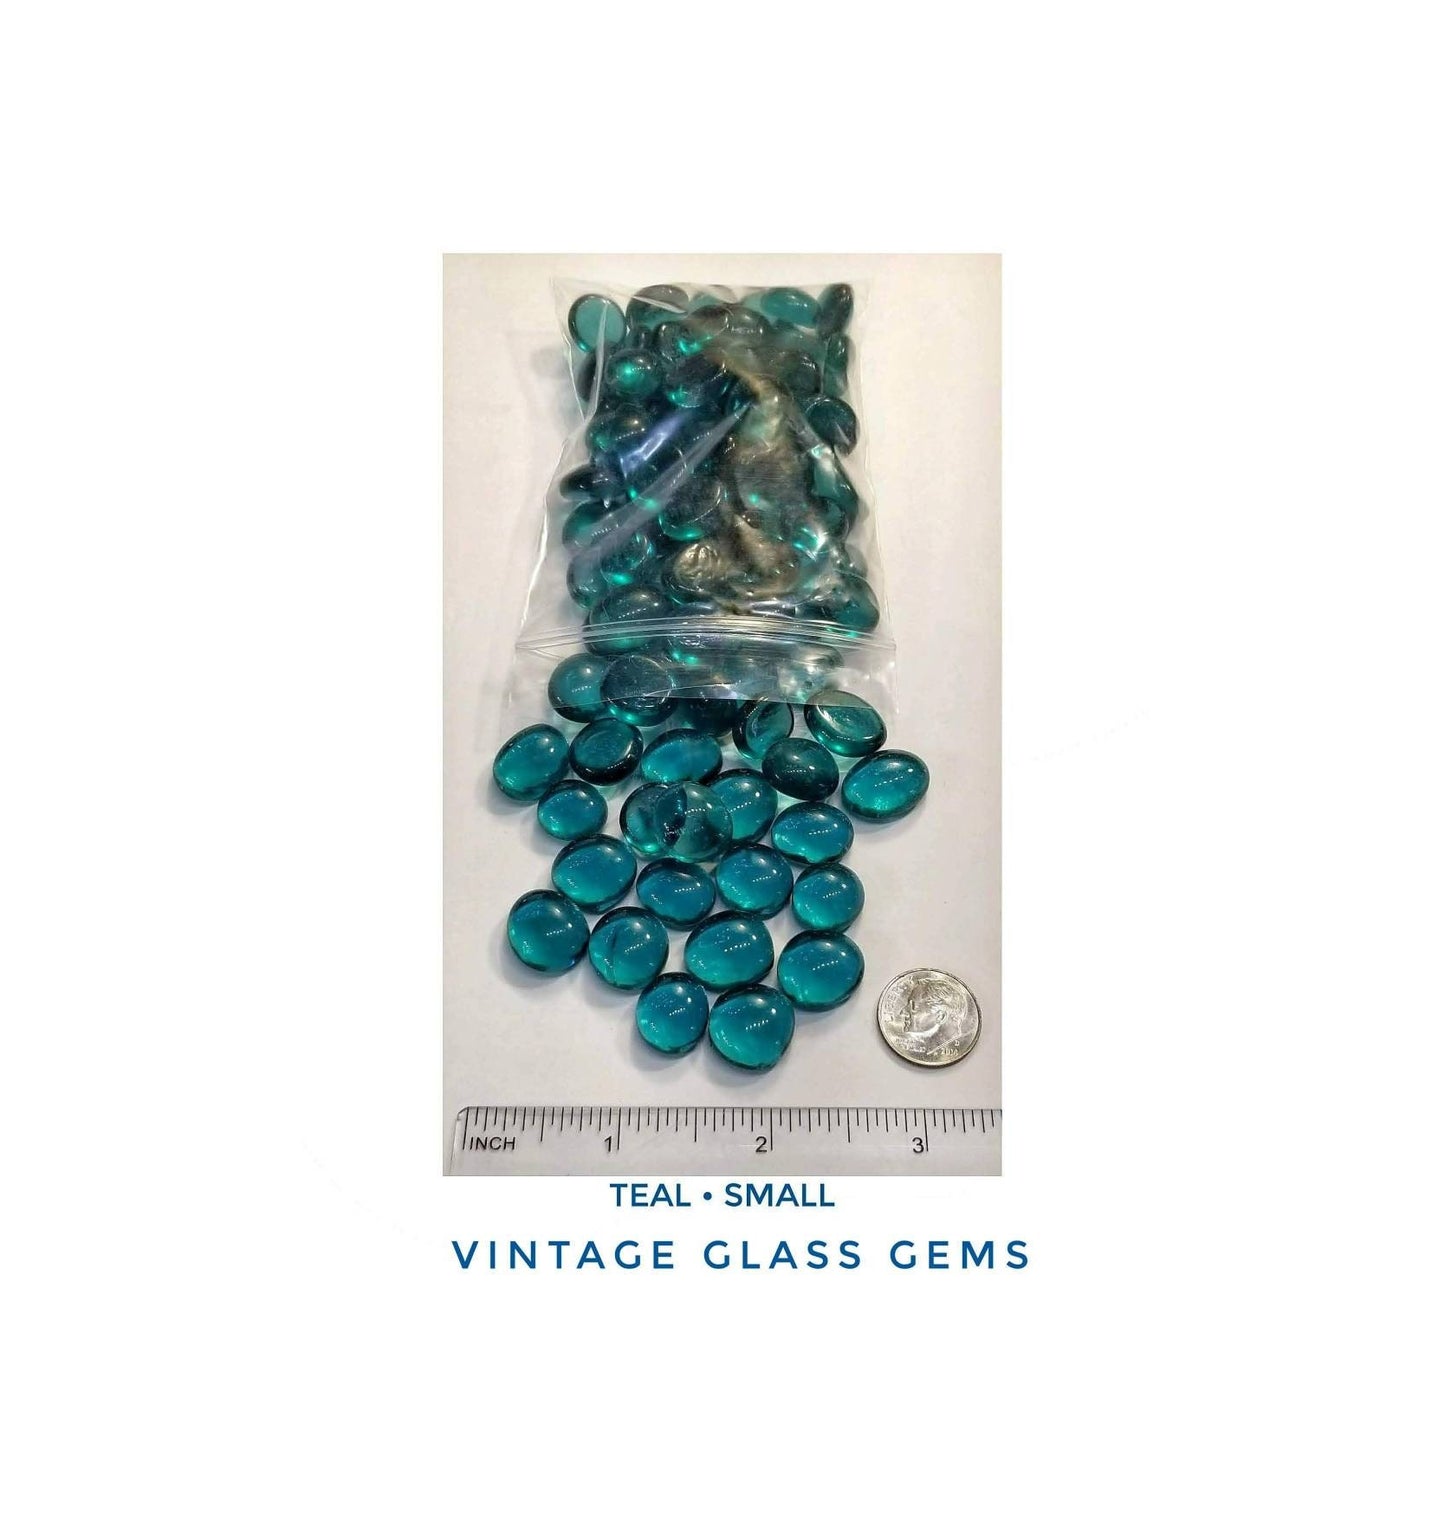 Teal Glass Nuggets for Stained Glass Stepping Stones, Jewelry Making Supply, Craft Projects. Small Gems as pictured. Table Decorations.